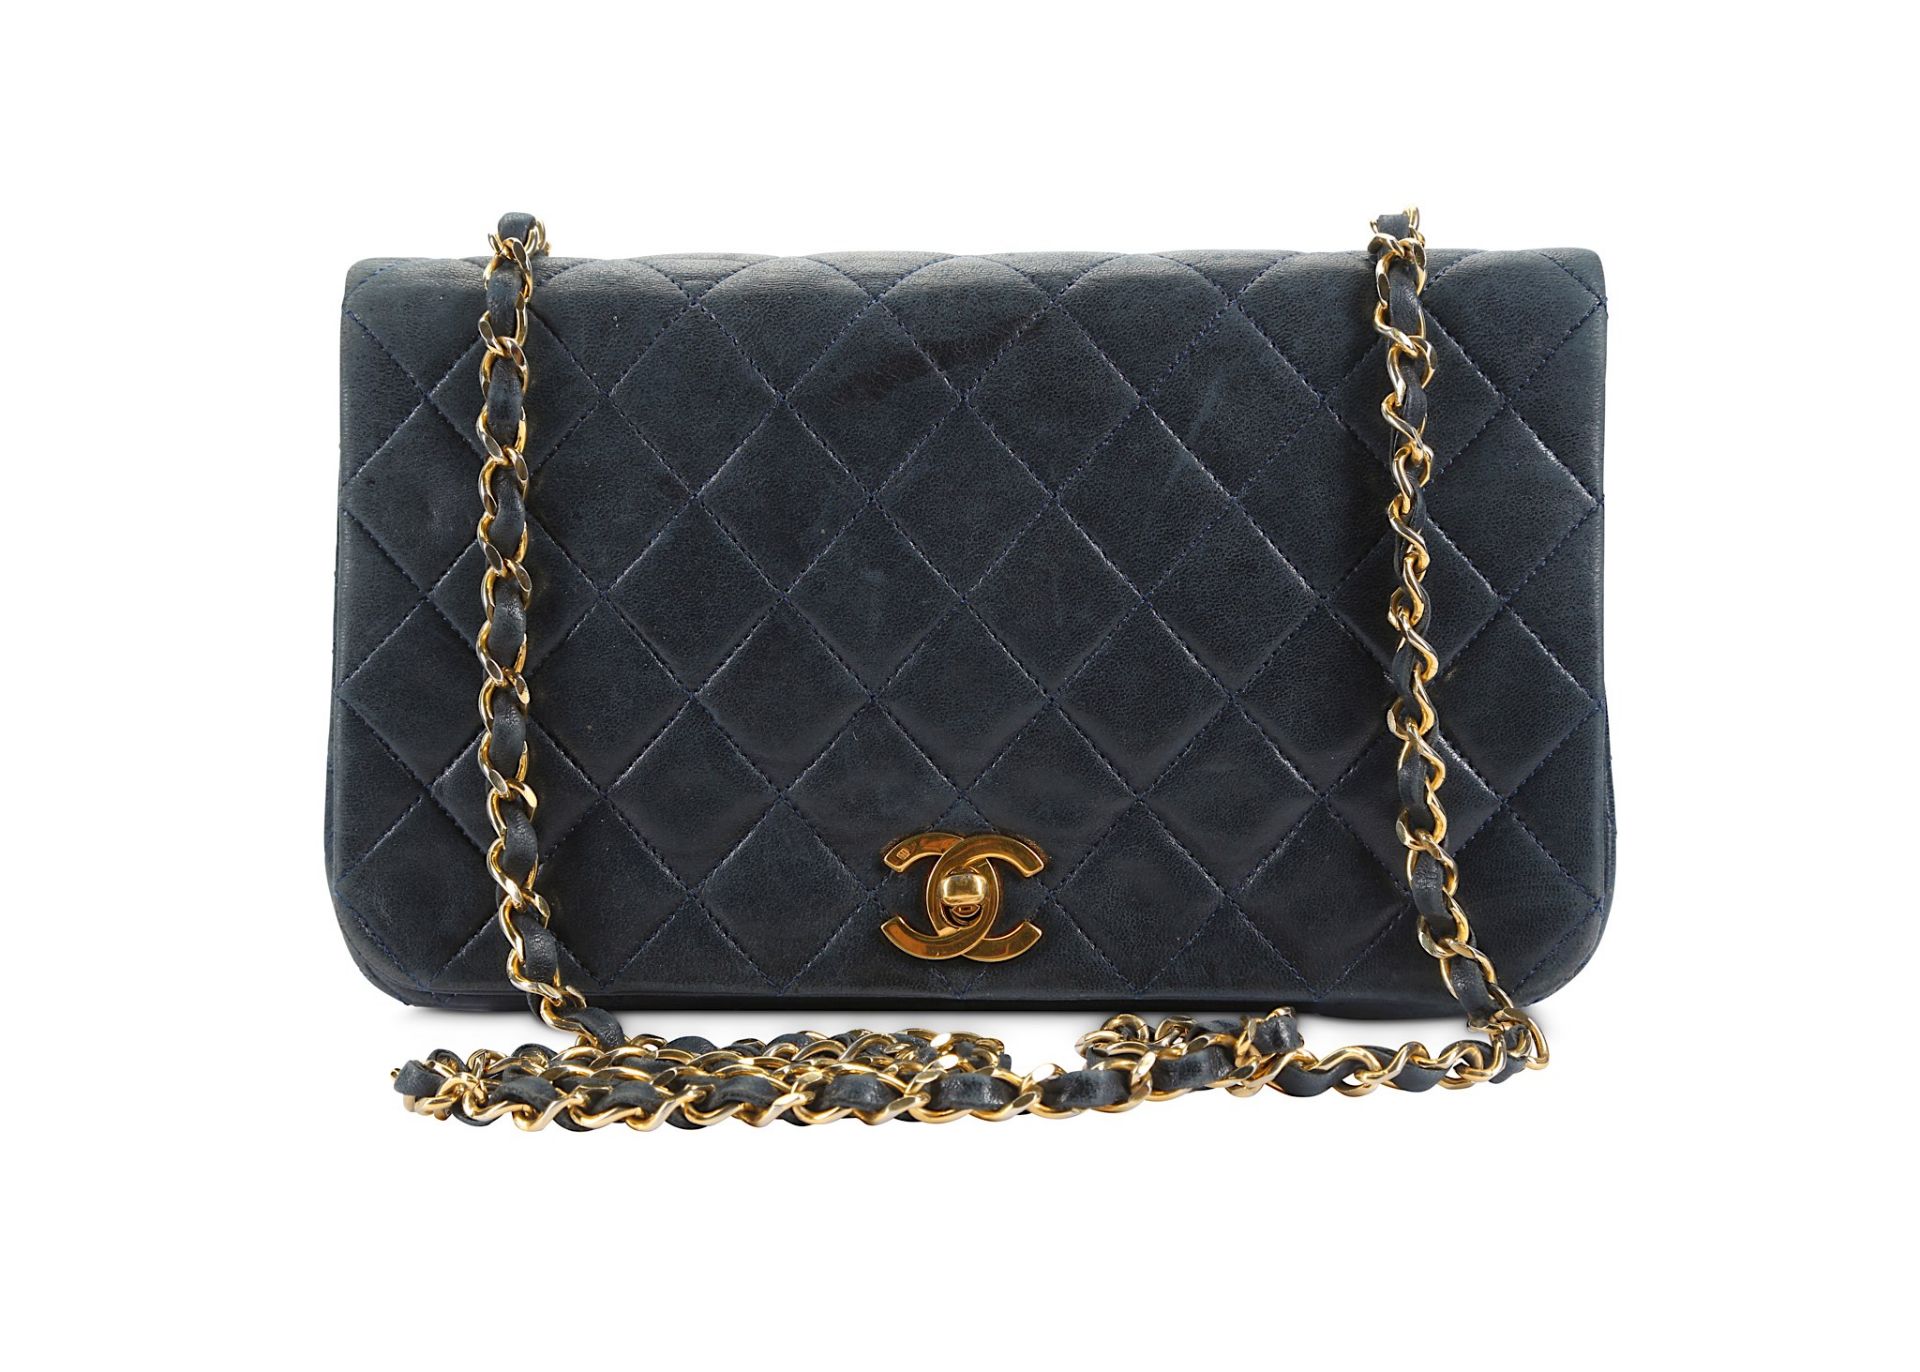 Chanel Navy Full Flap Bag, c. 1989-91, quilted lam